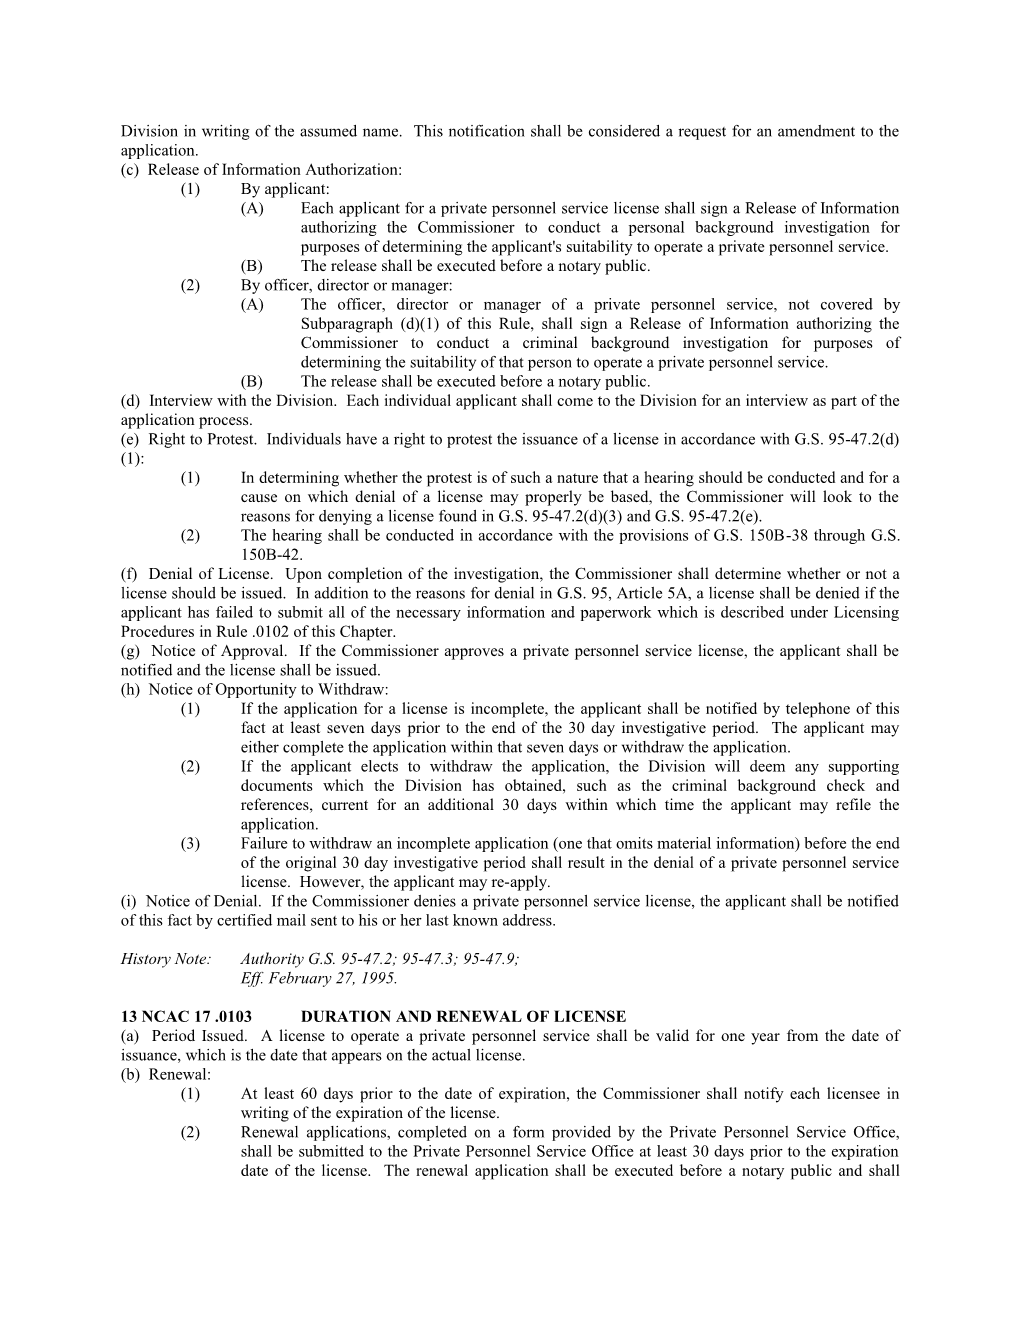 Section .0100 Private Personnel Services Regulations